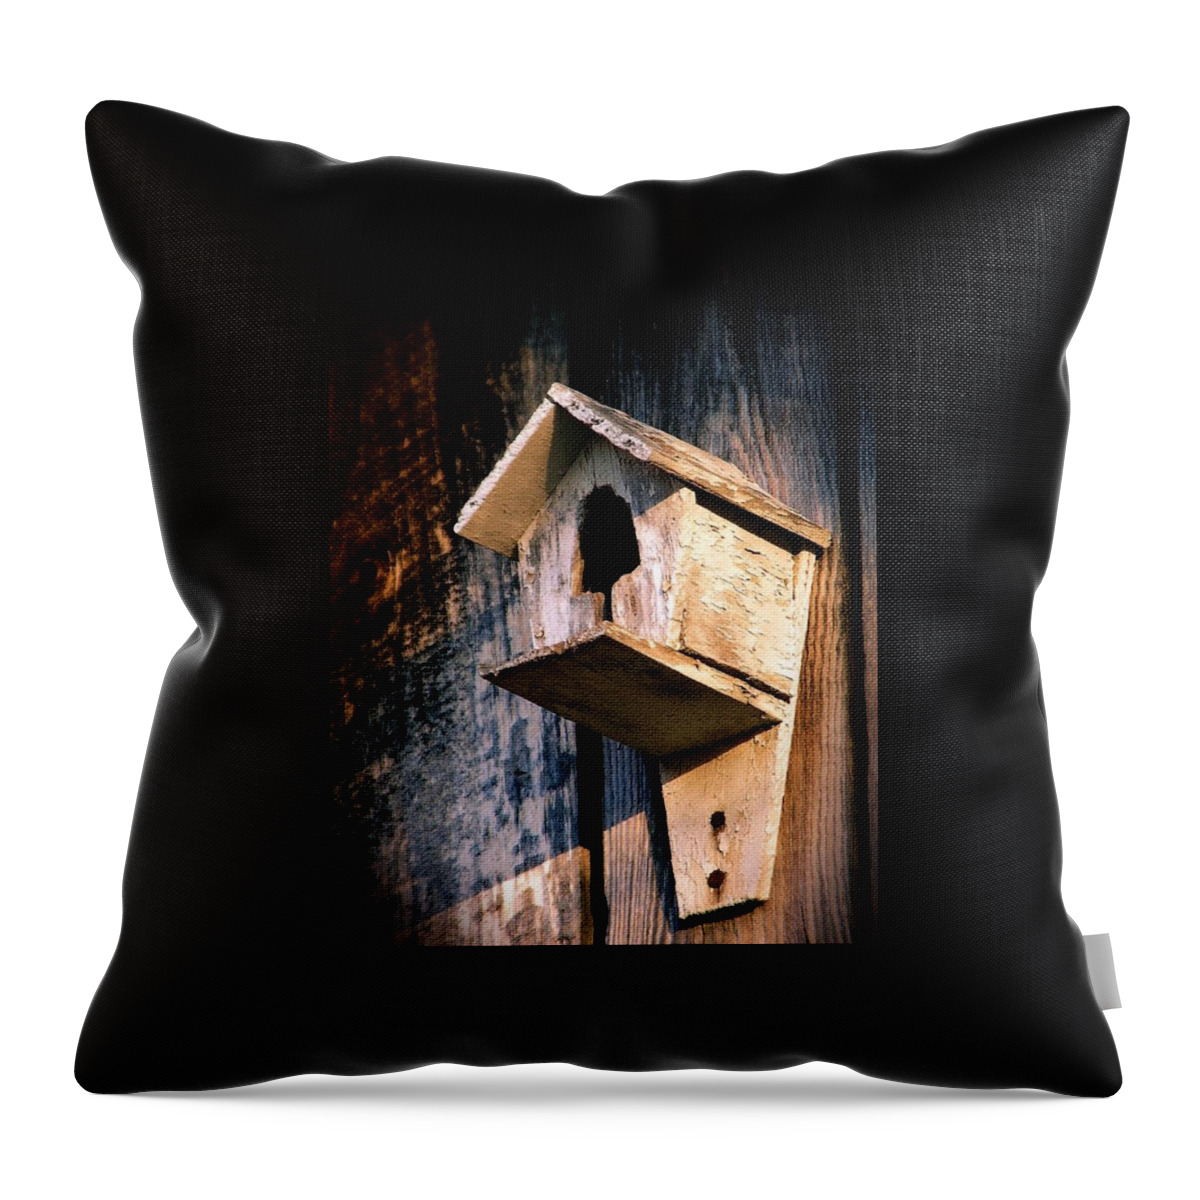 Antique Throw Pillow featuring the photograph Vintage Birdhouse by Jen McKnight